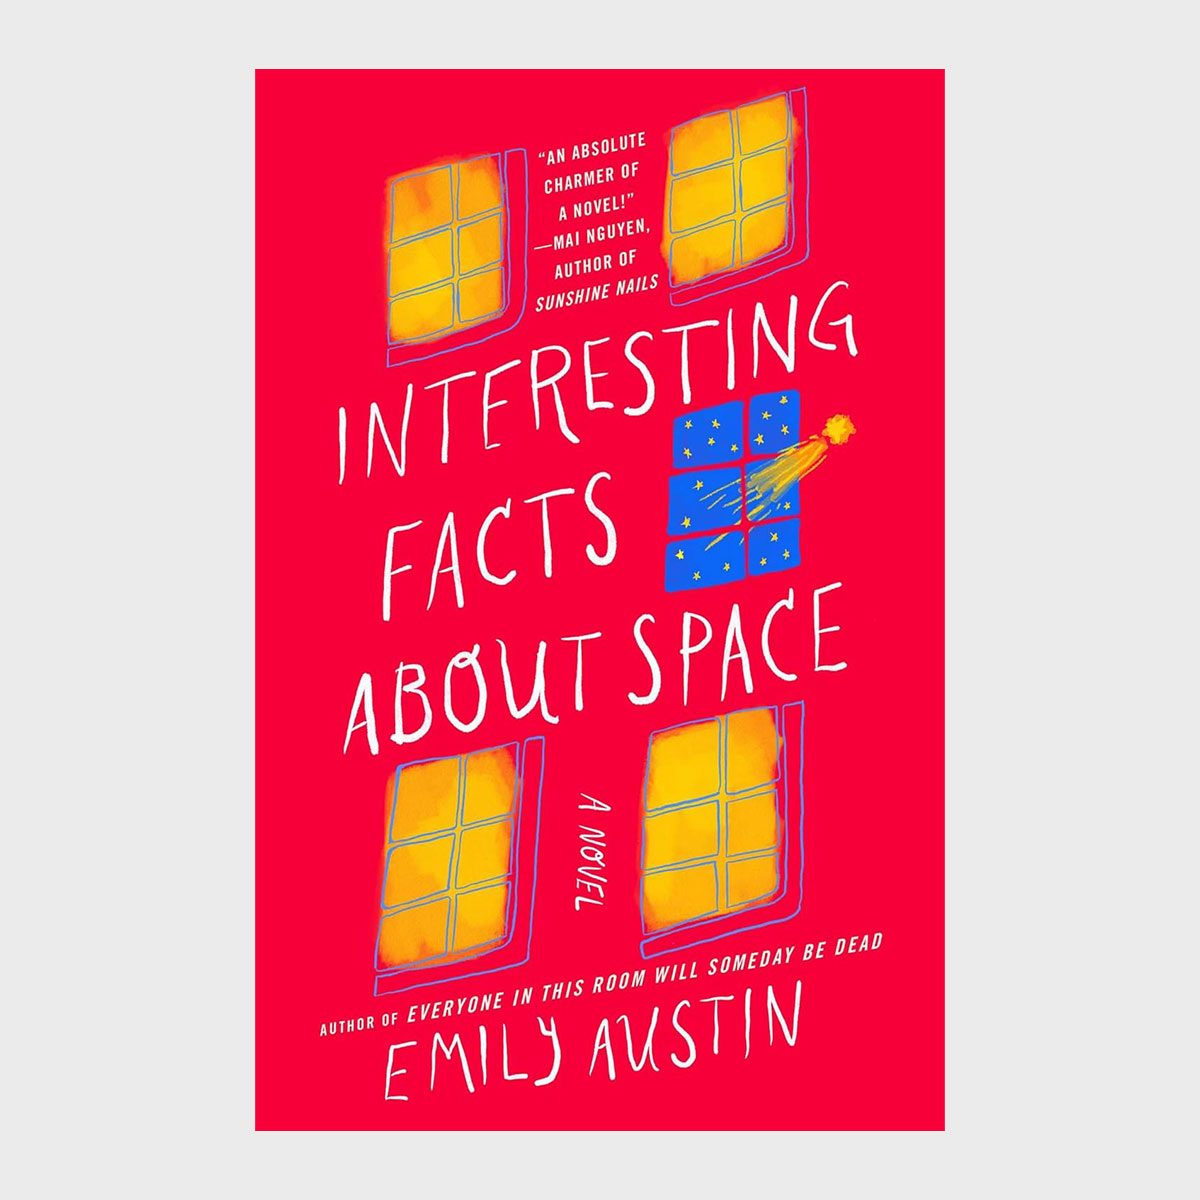 Interesting Facts About Space By Emily Austin